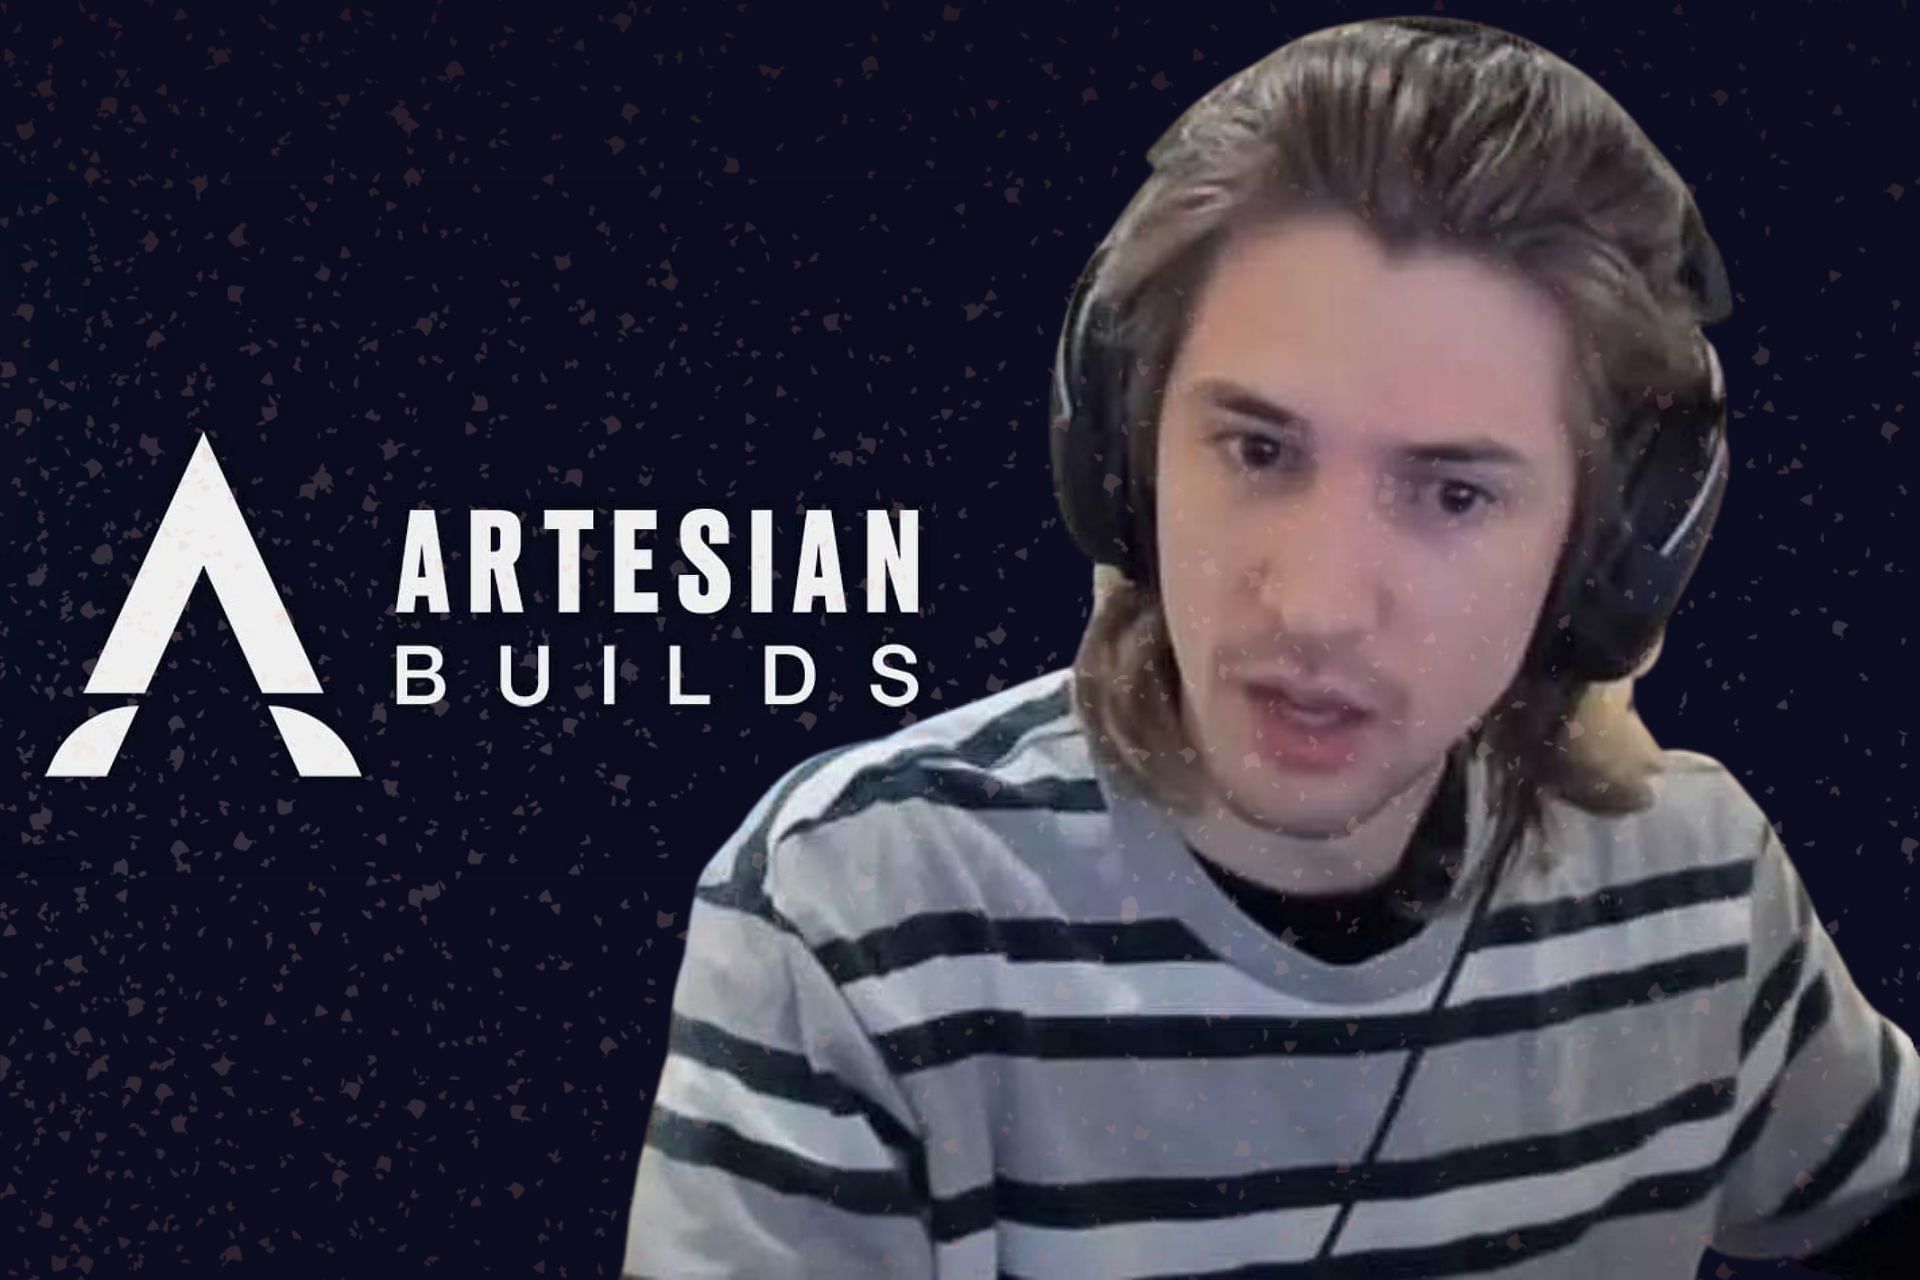 xQc had plenty to say about Artesian Builds and their sponsored streamers in a recent stream (Image via Sportskeeda)